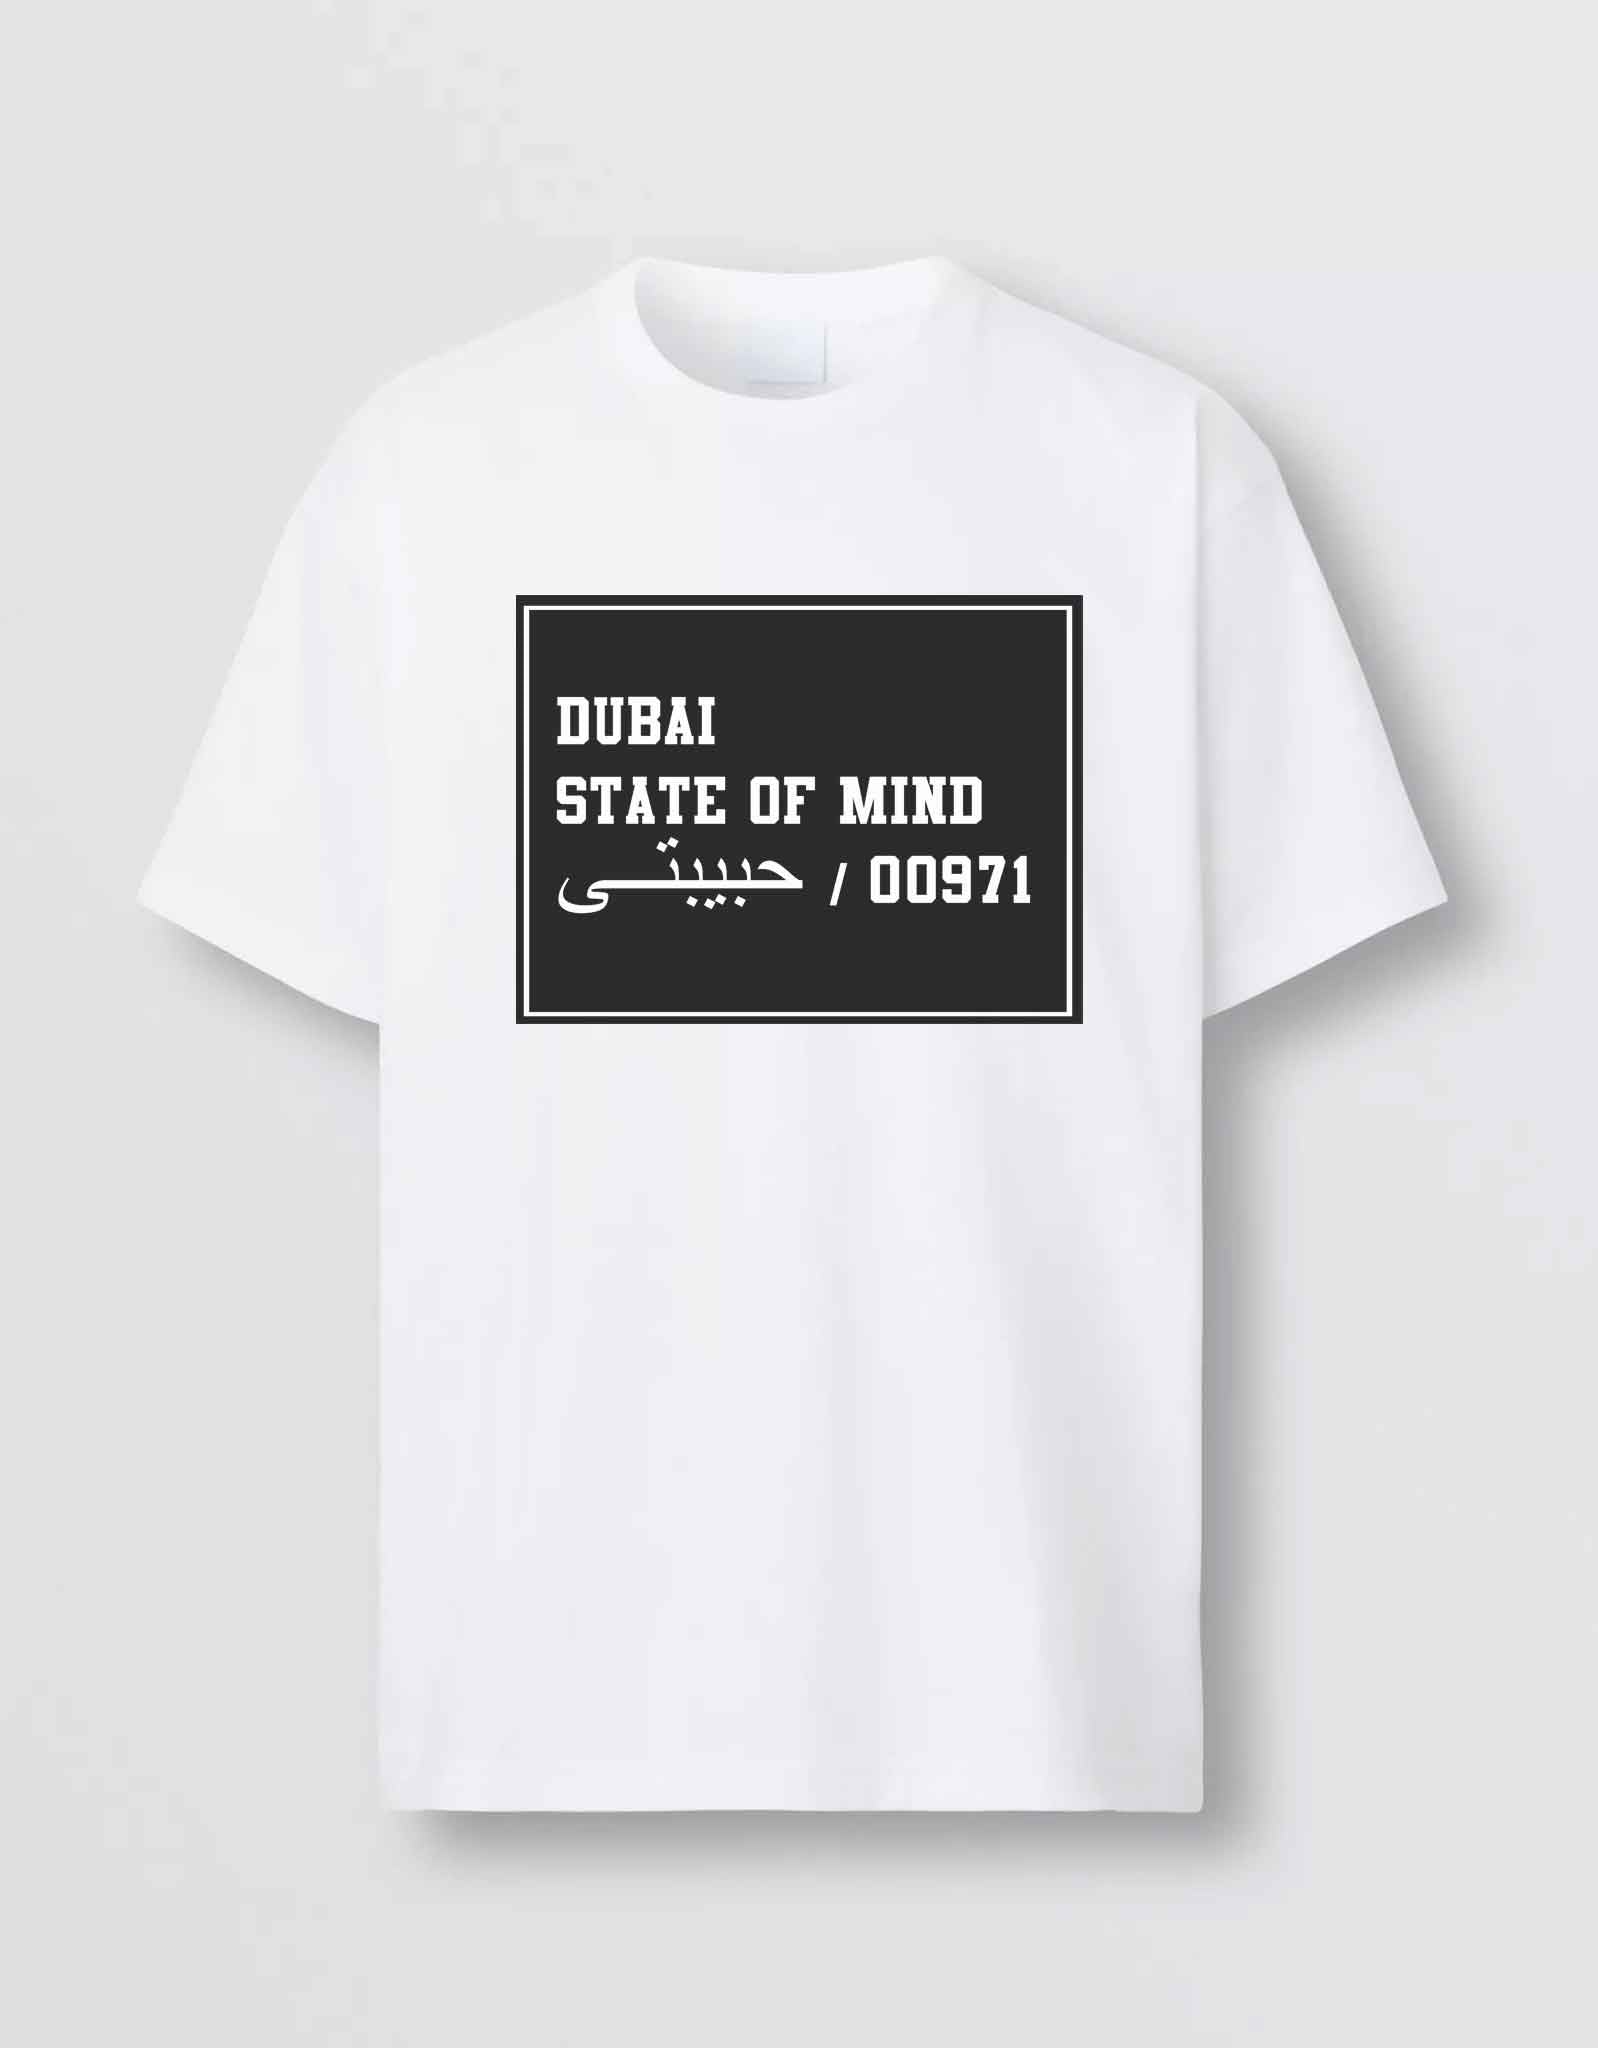 T-shirt Dubai State of mind Homme - Lasourcedustyle